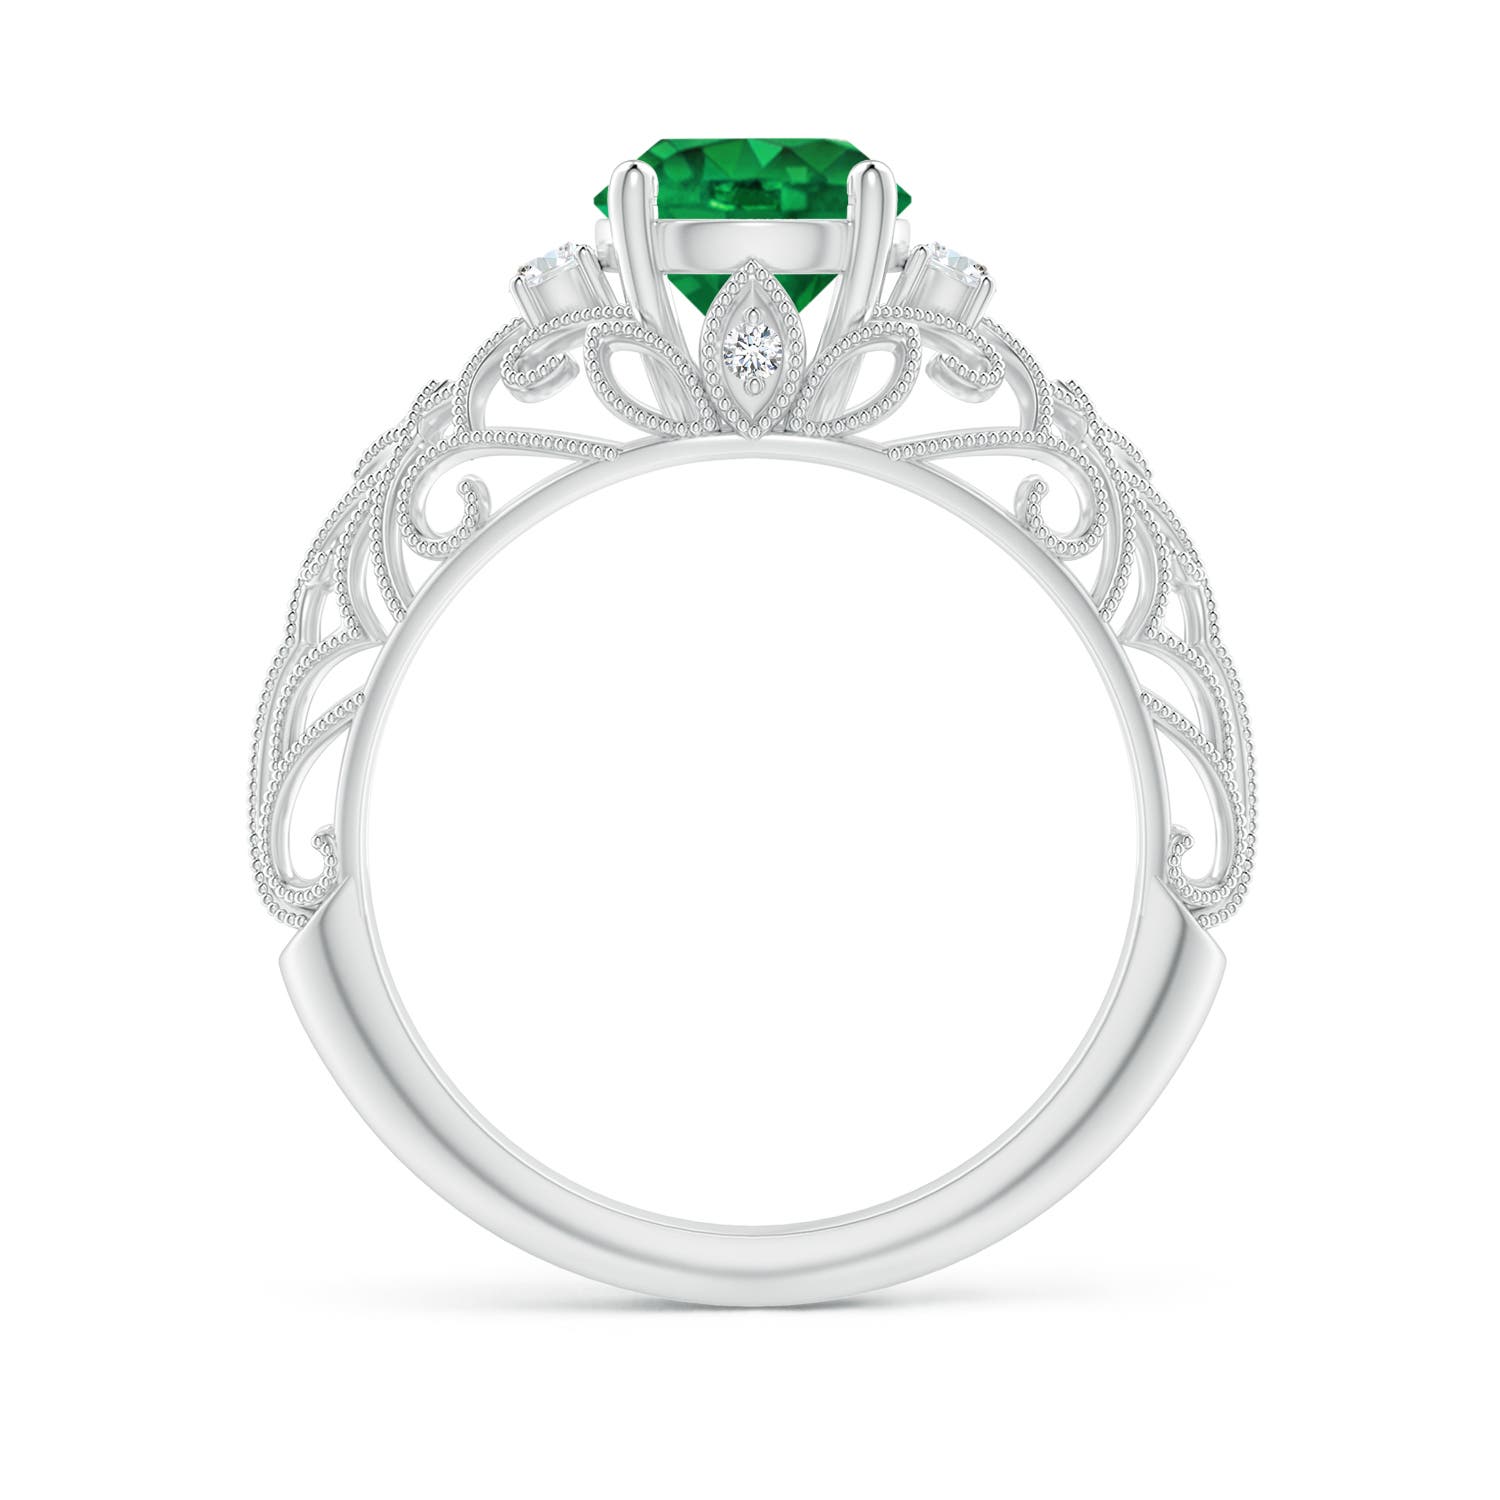 AAA - Emerald / 1.3 CT / 14 KT White Gold